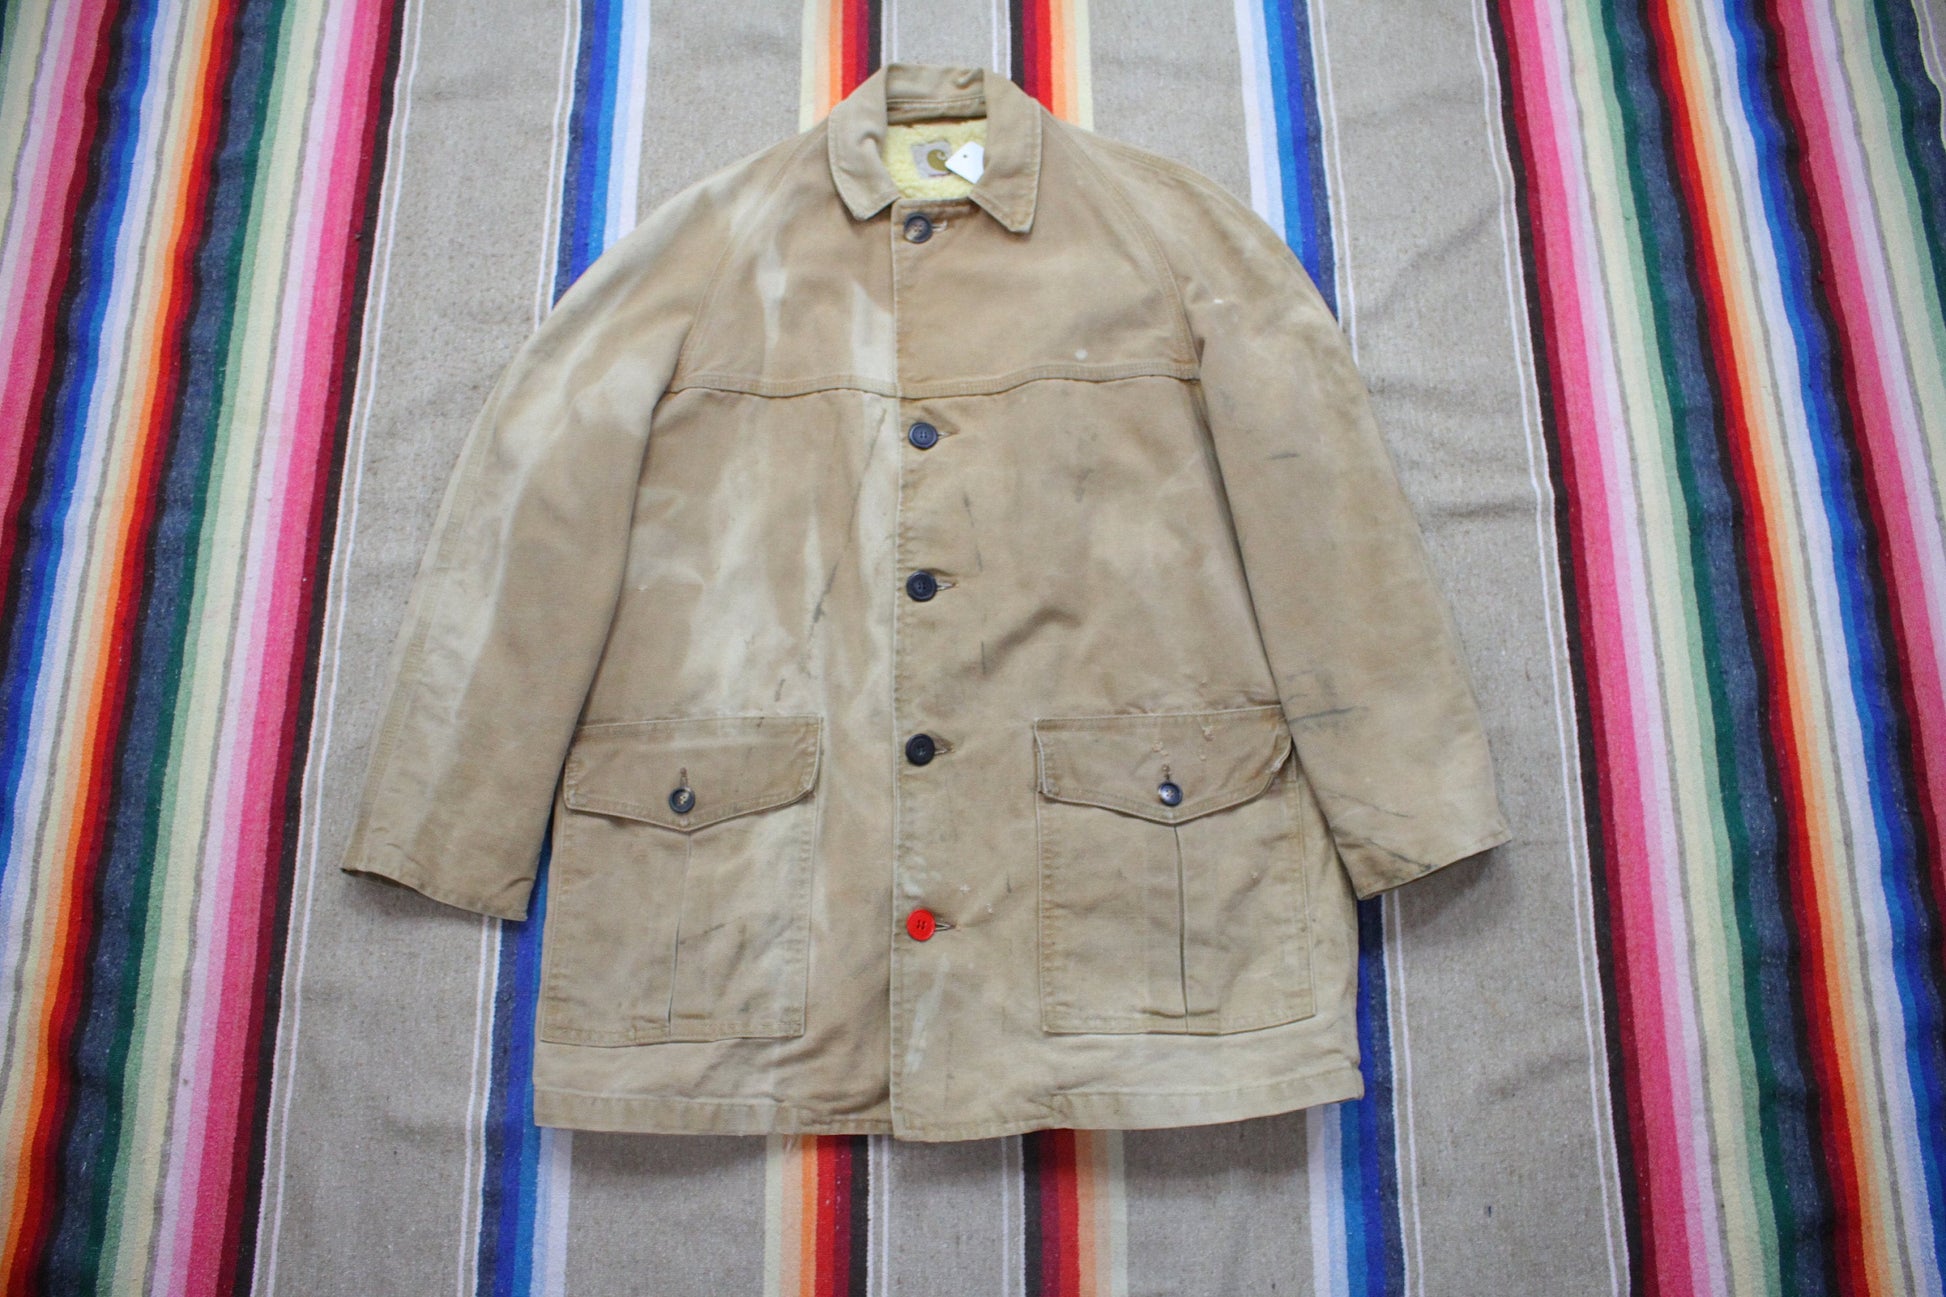 1970s/1980s Carhartt Sherpa Lined Duck Cotton Western Style Work Jacket Size M